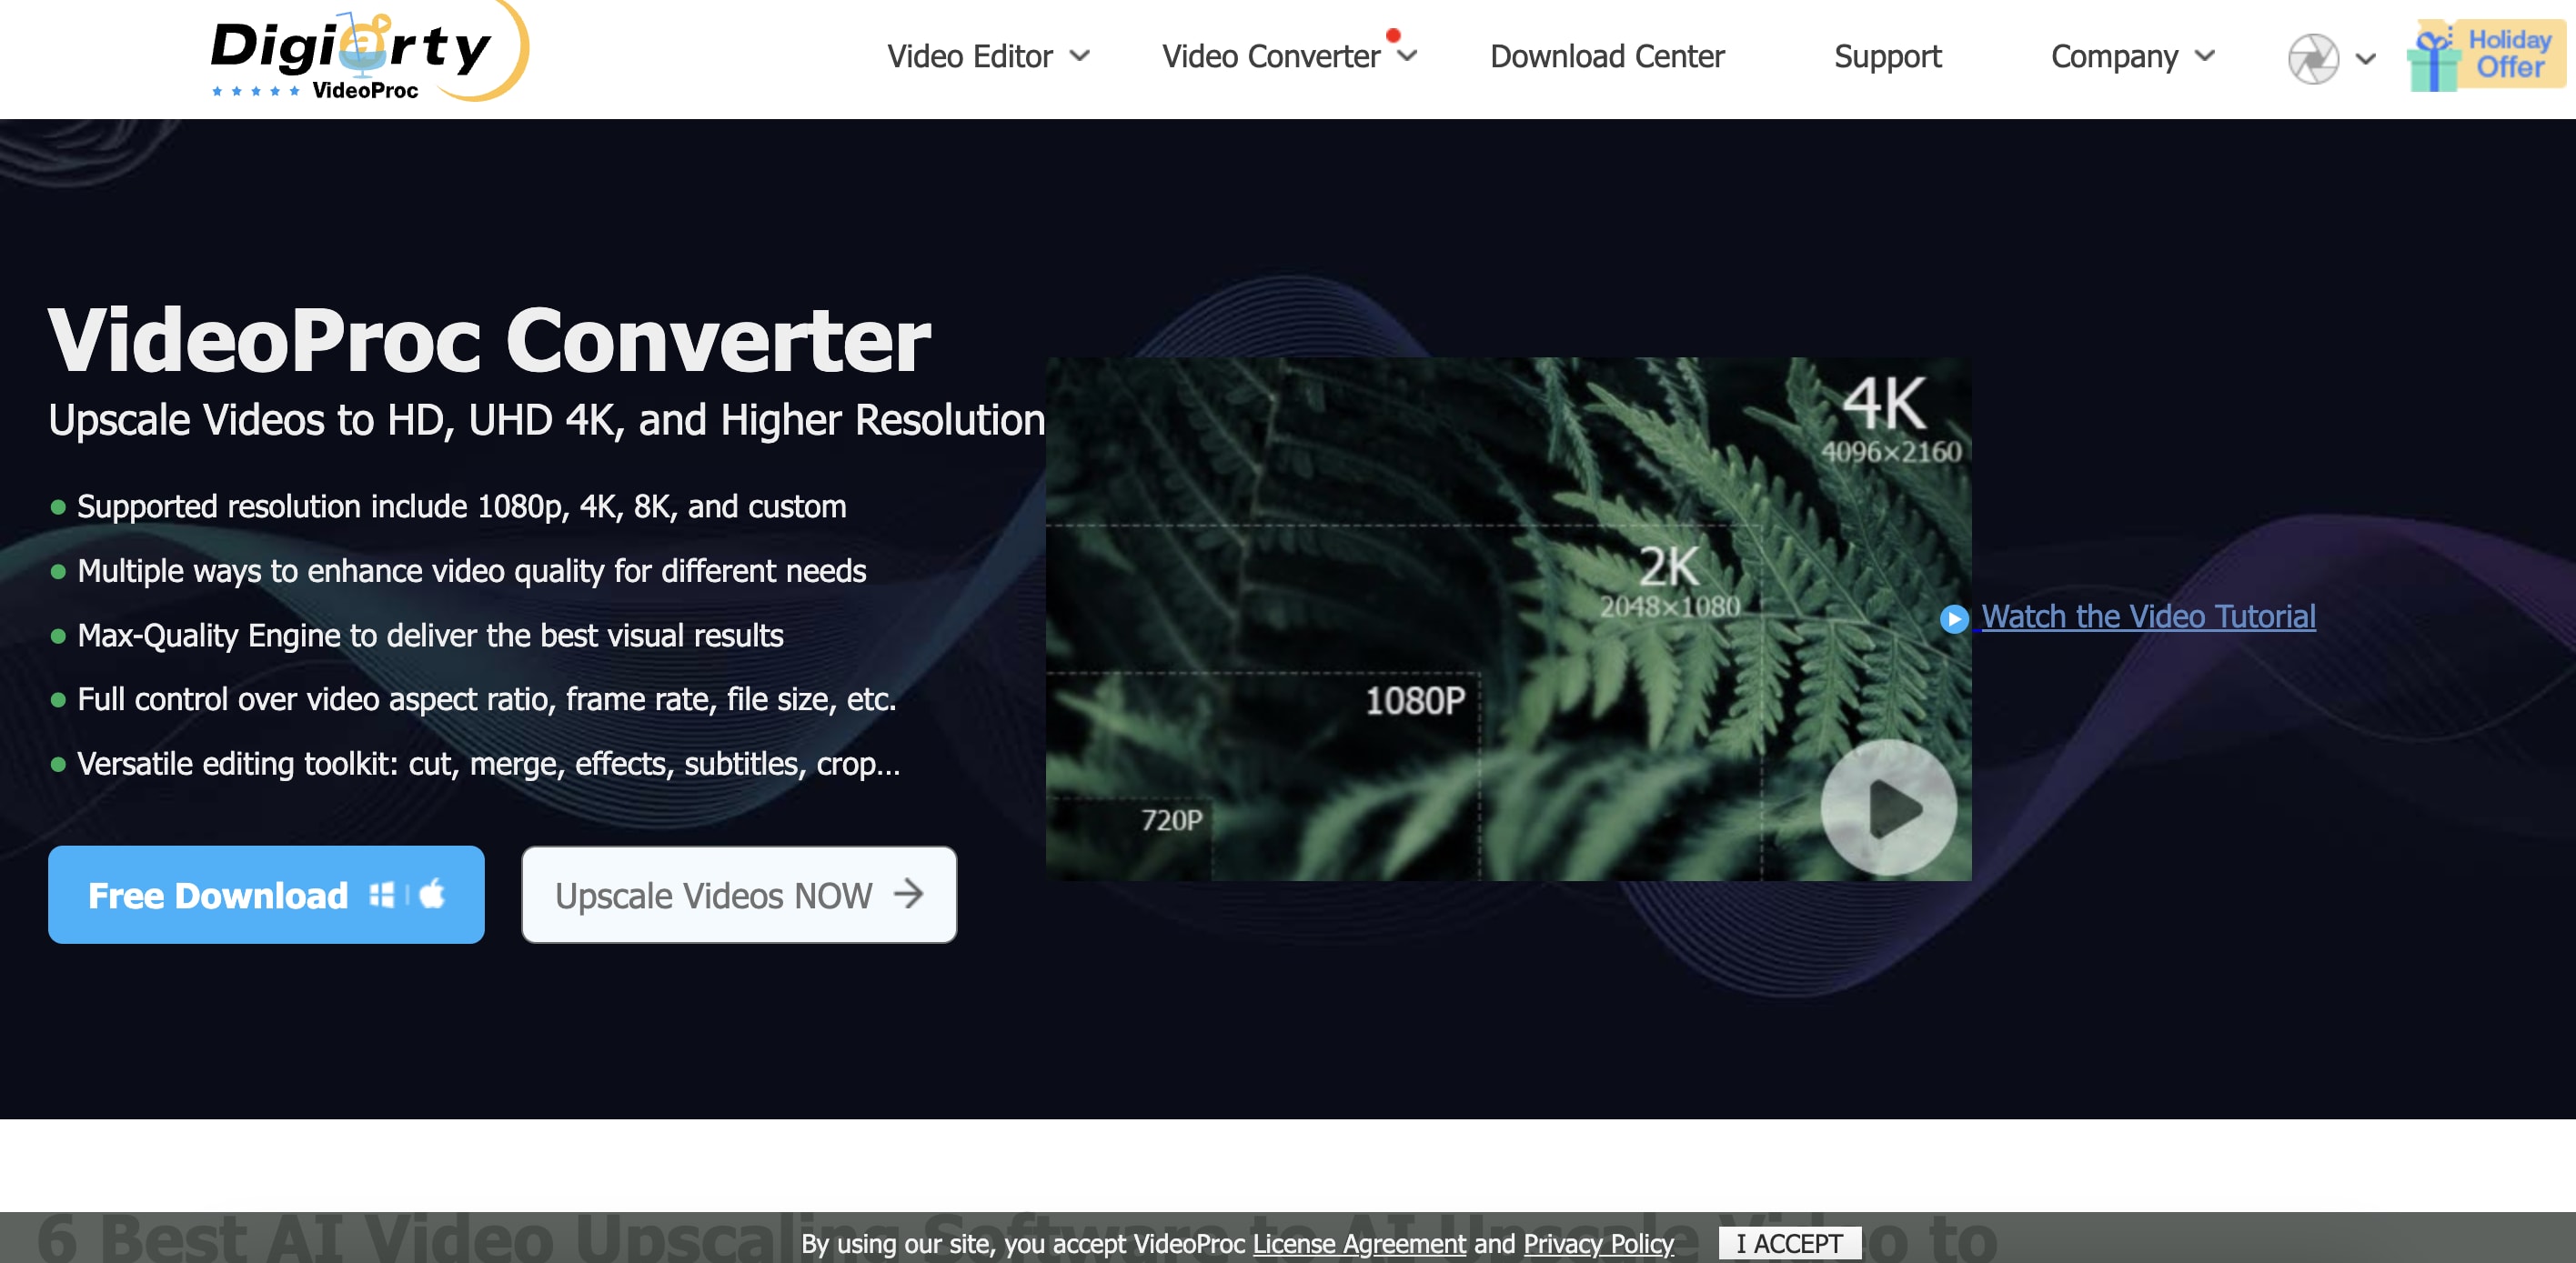 VideoProc Converter home page